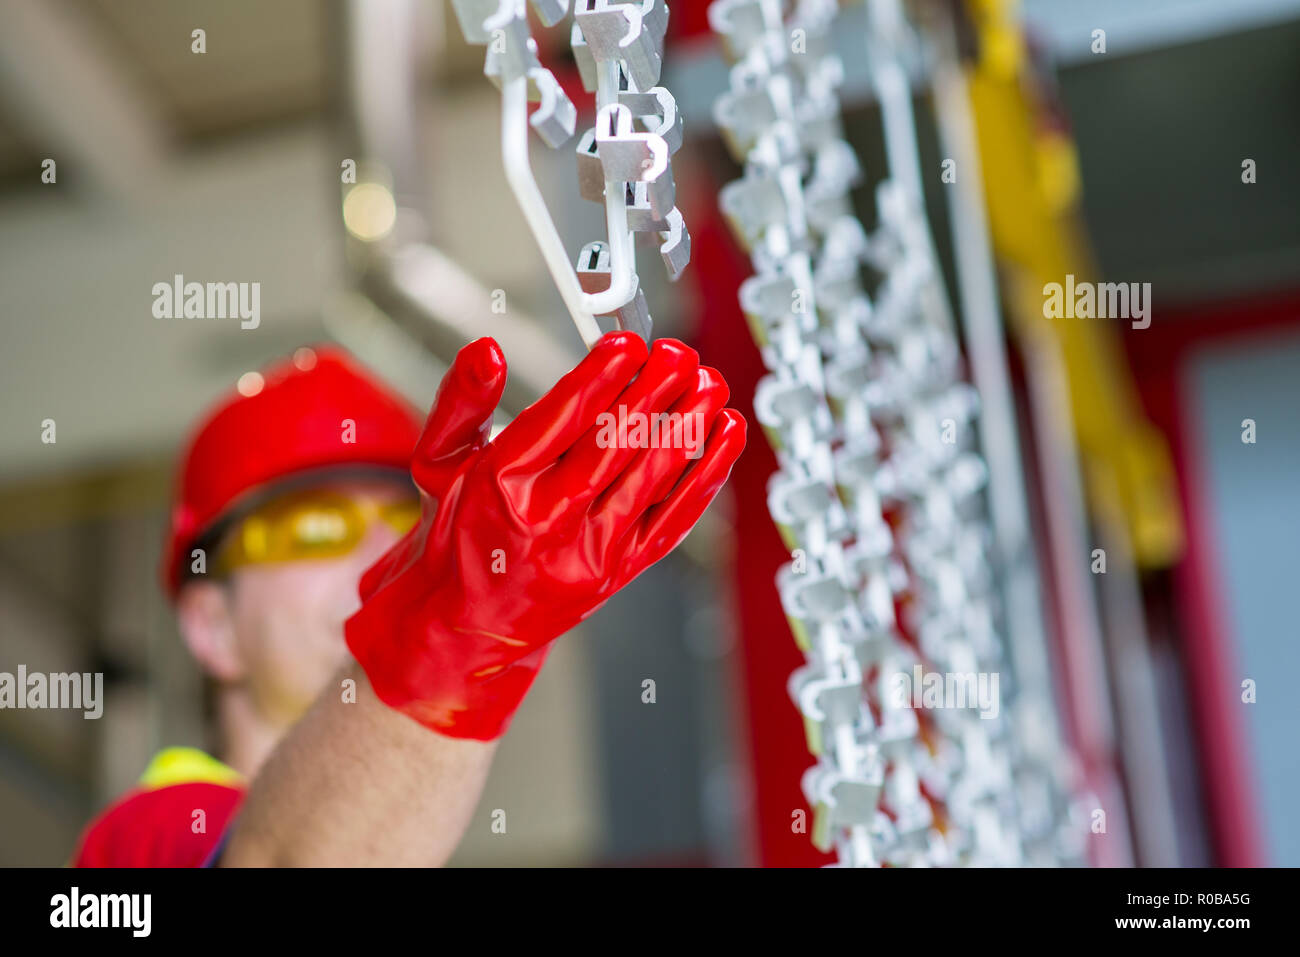 Factory engineer checking production line with red protective gloves Stock Photo